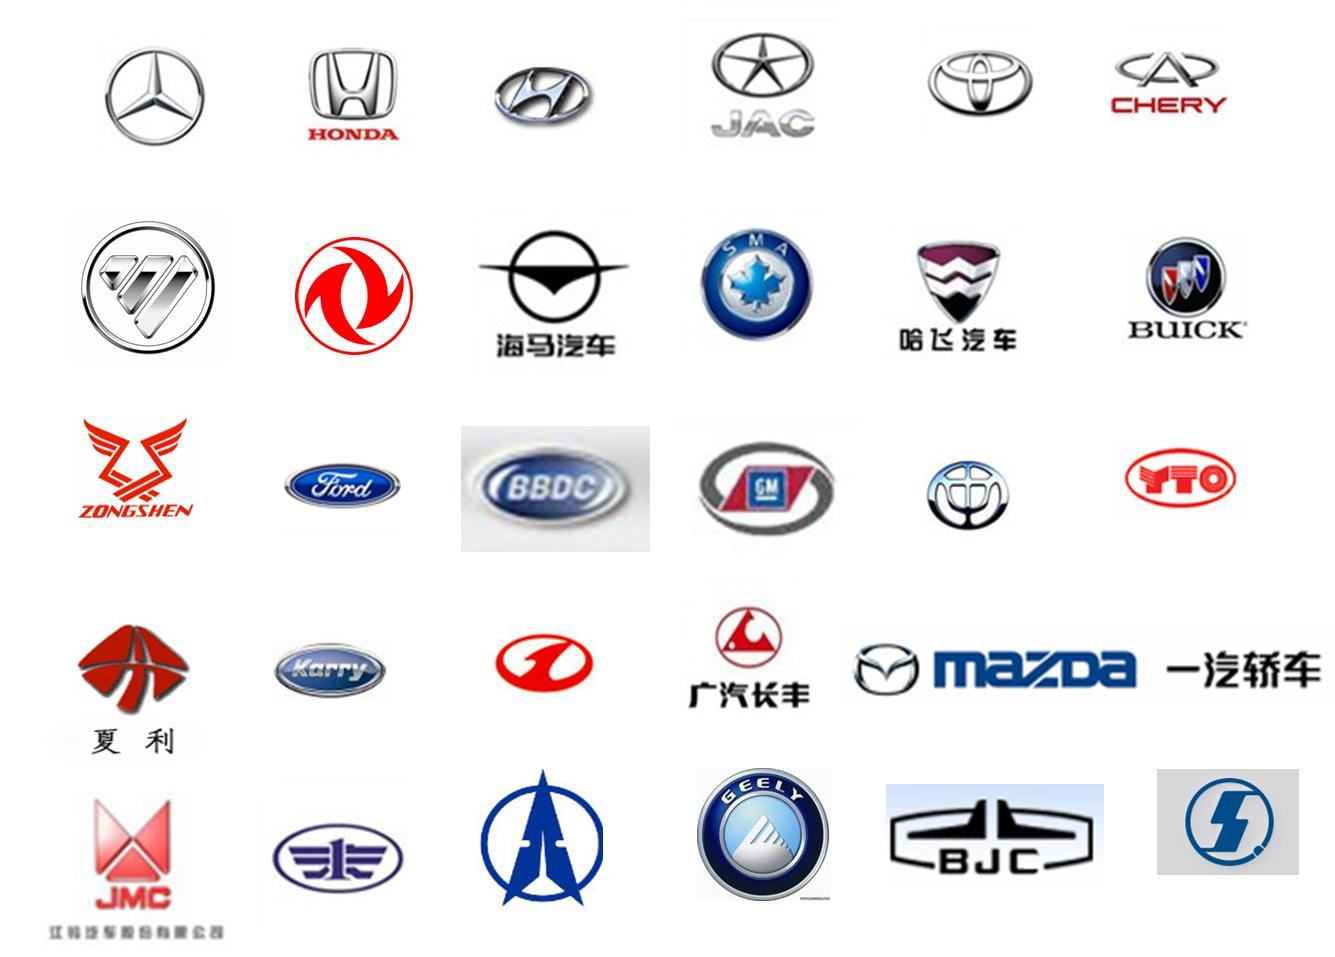 Automobile Makers Logo - All Car Brands Logos And Names | Chainimage